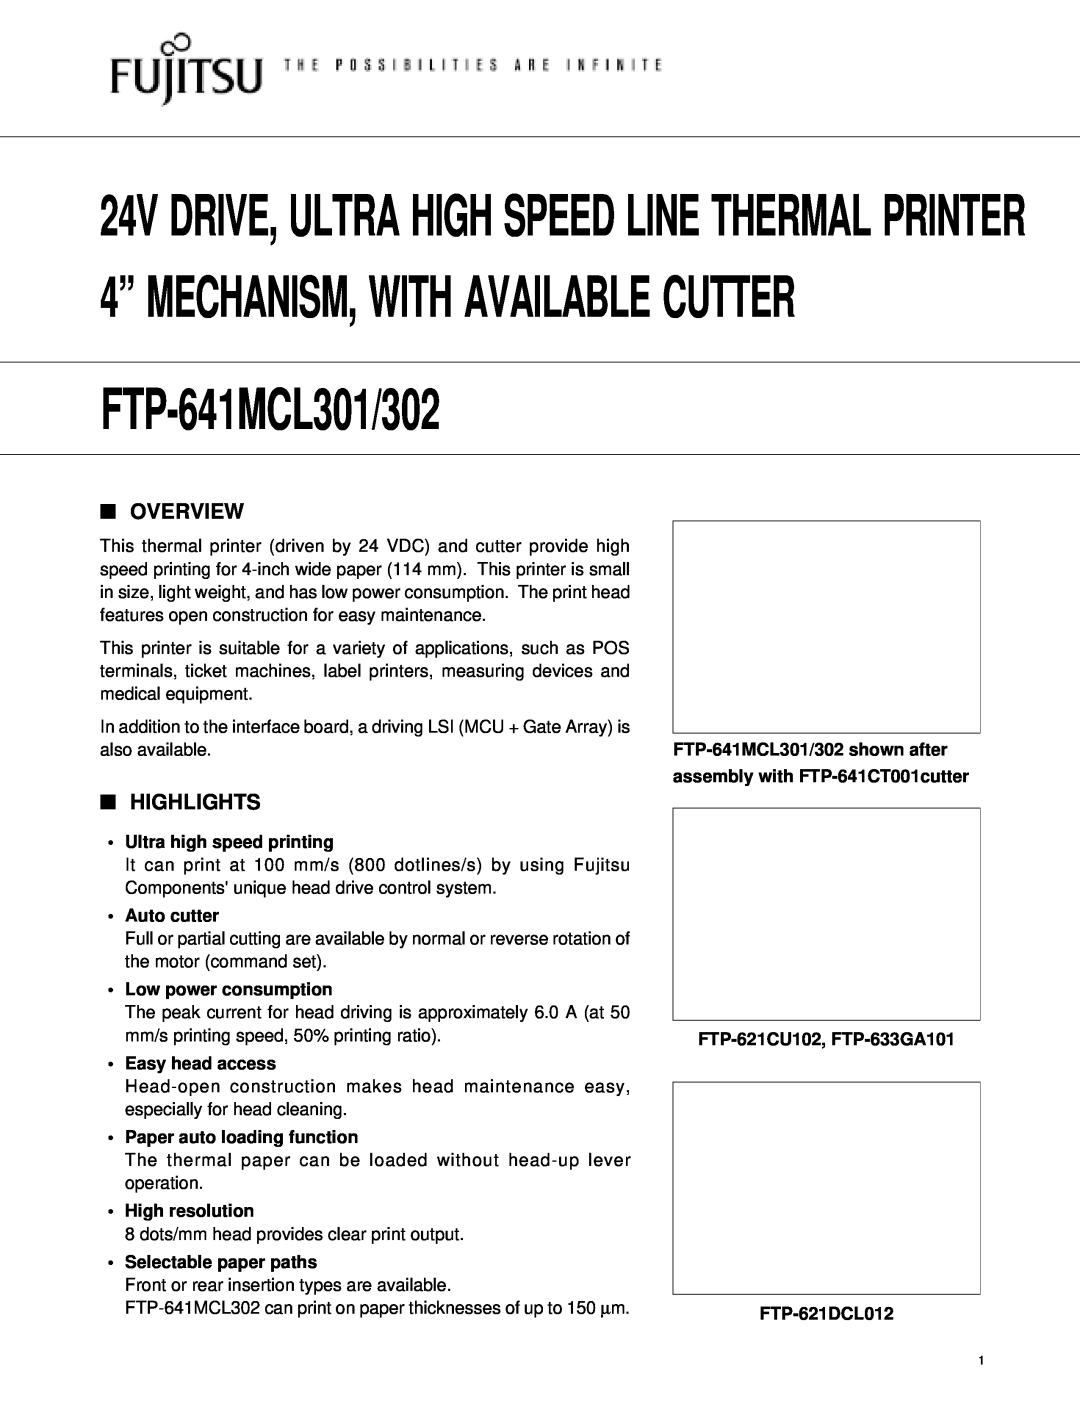 Fujitsu FTP-641MCL302 manual Overview, Highlights, Ultra high speed printing, Auto cutter, Low power consumption 